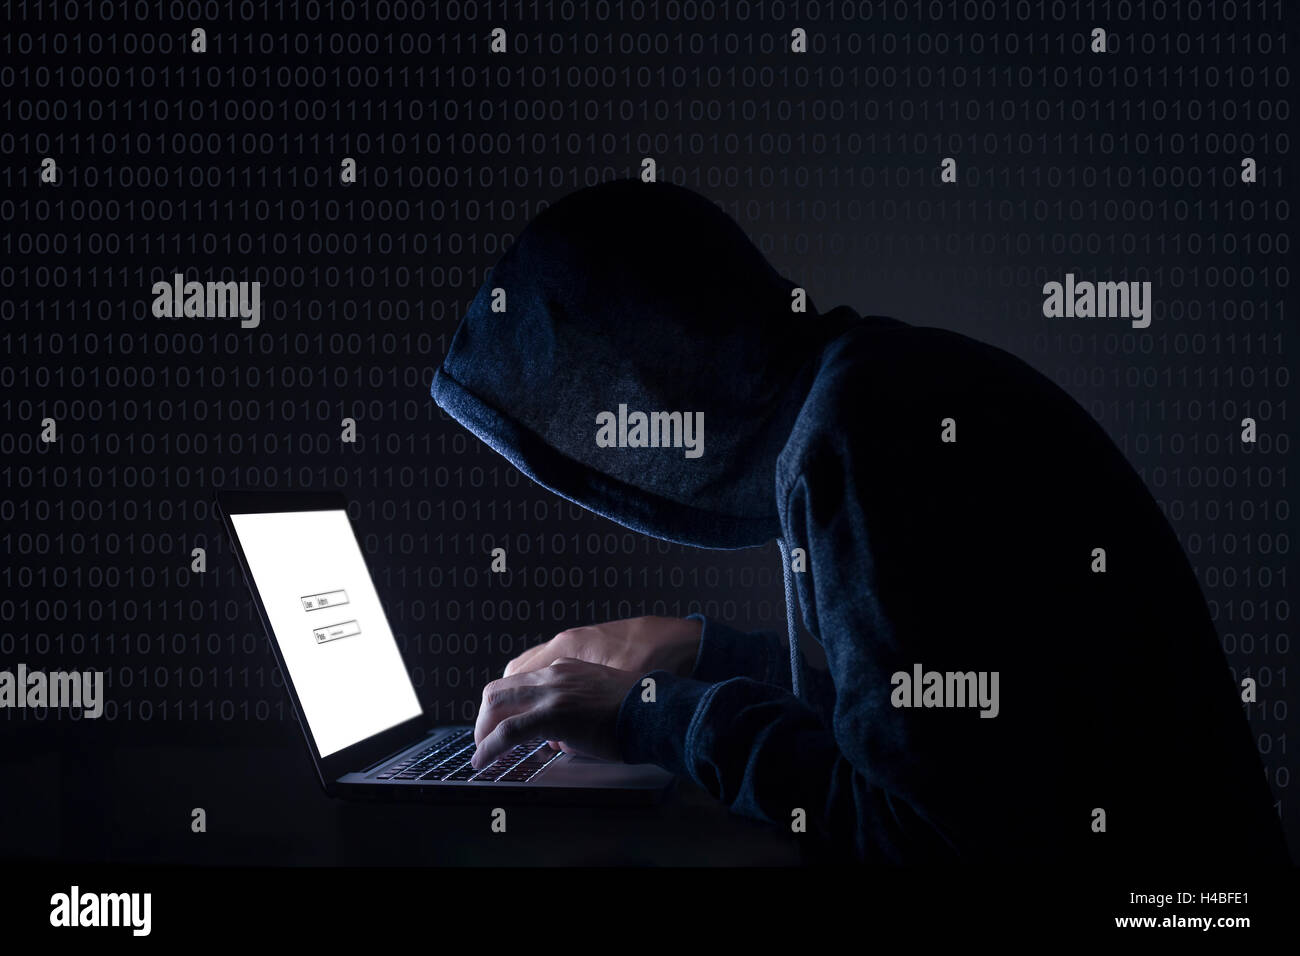 Hacker with laptop initiating cyber attack Stock Photo